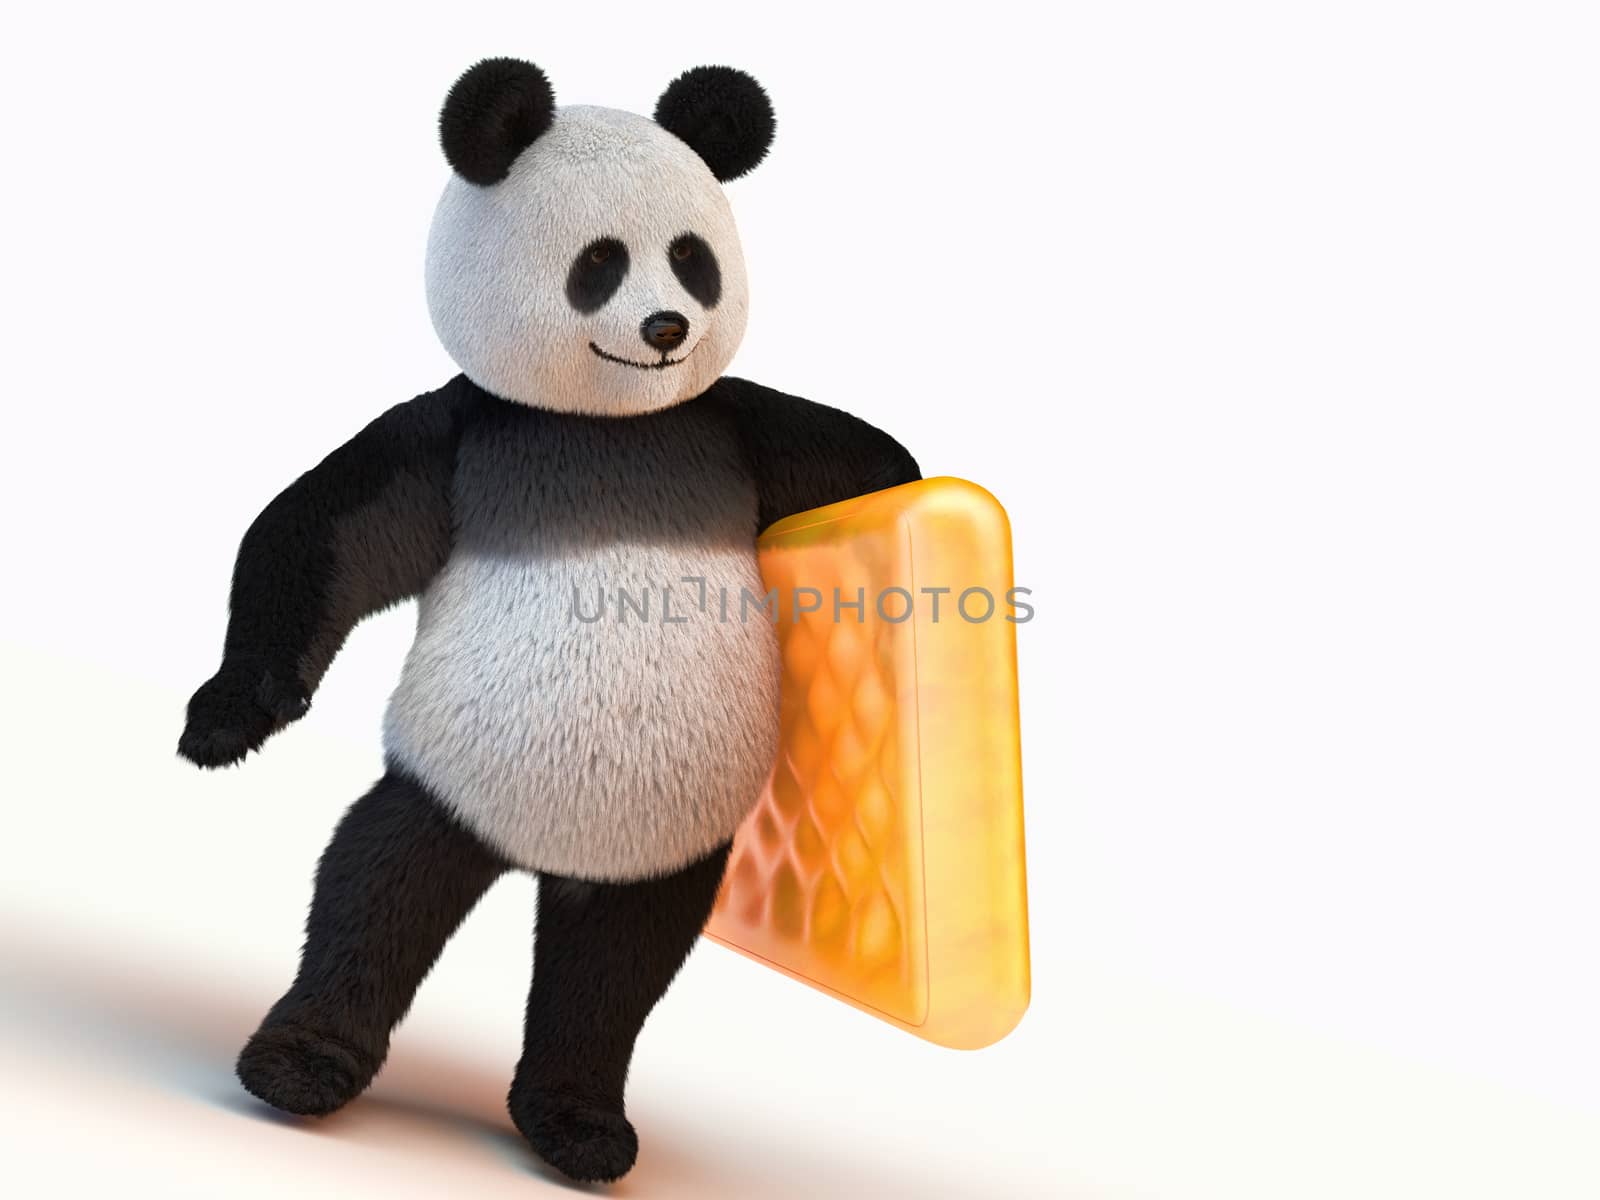 fluffy, fuzzy, furry, downy 3d render panda character by xtate